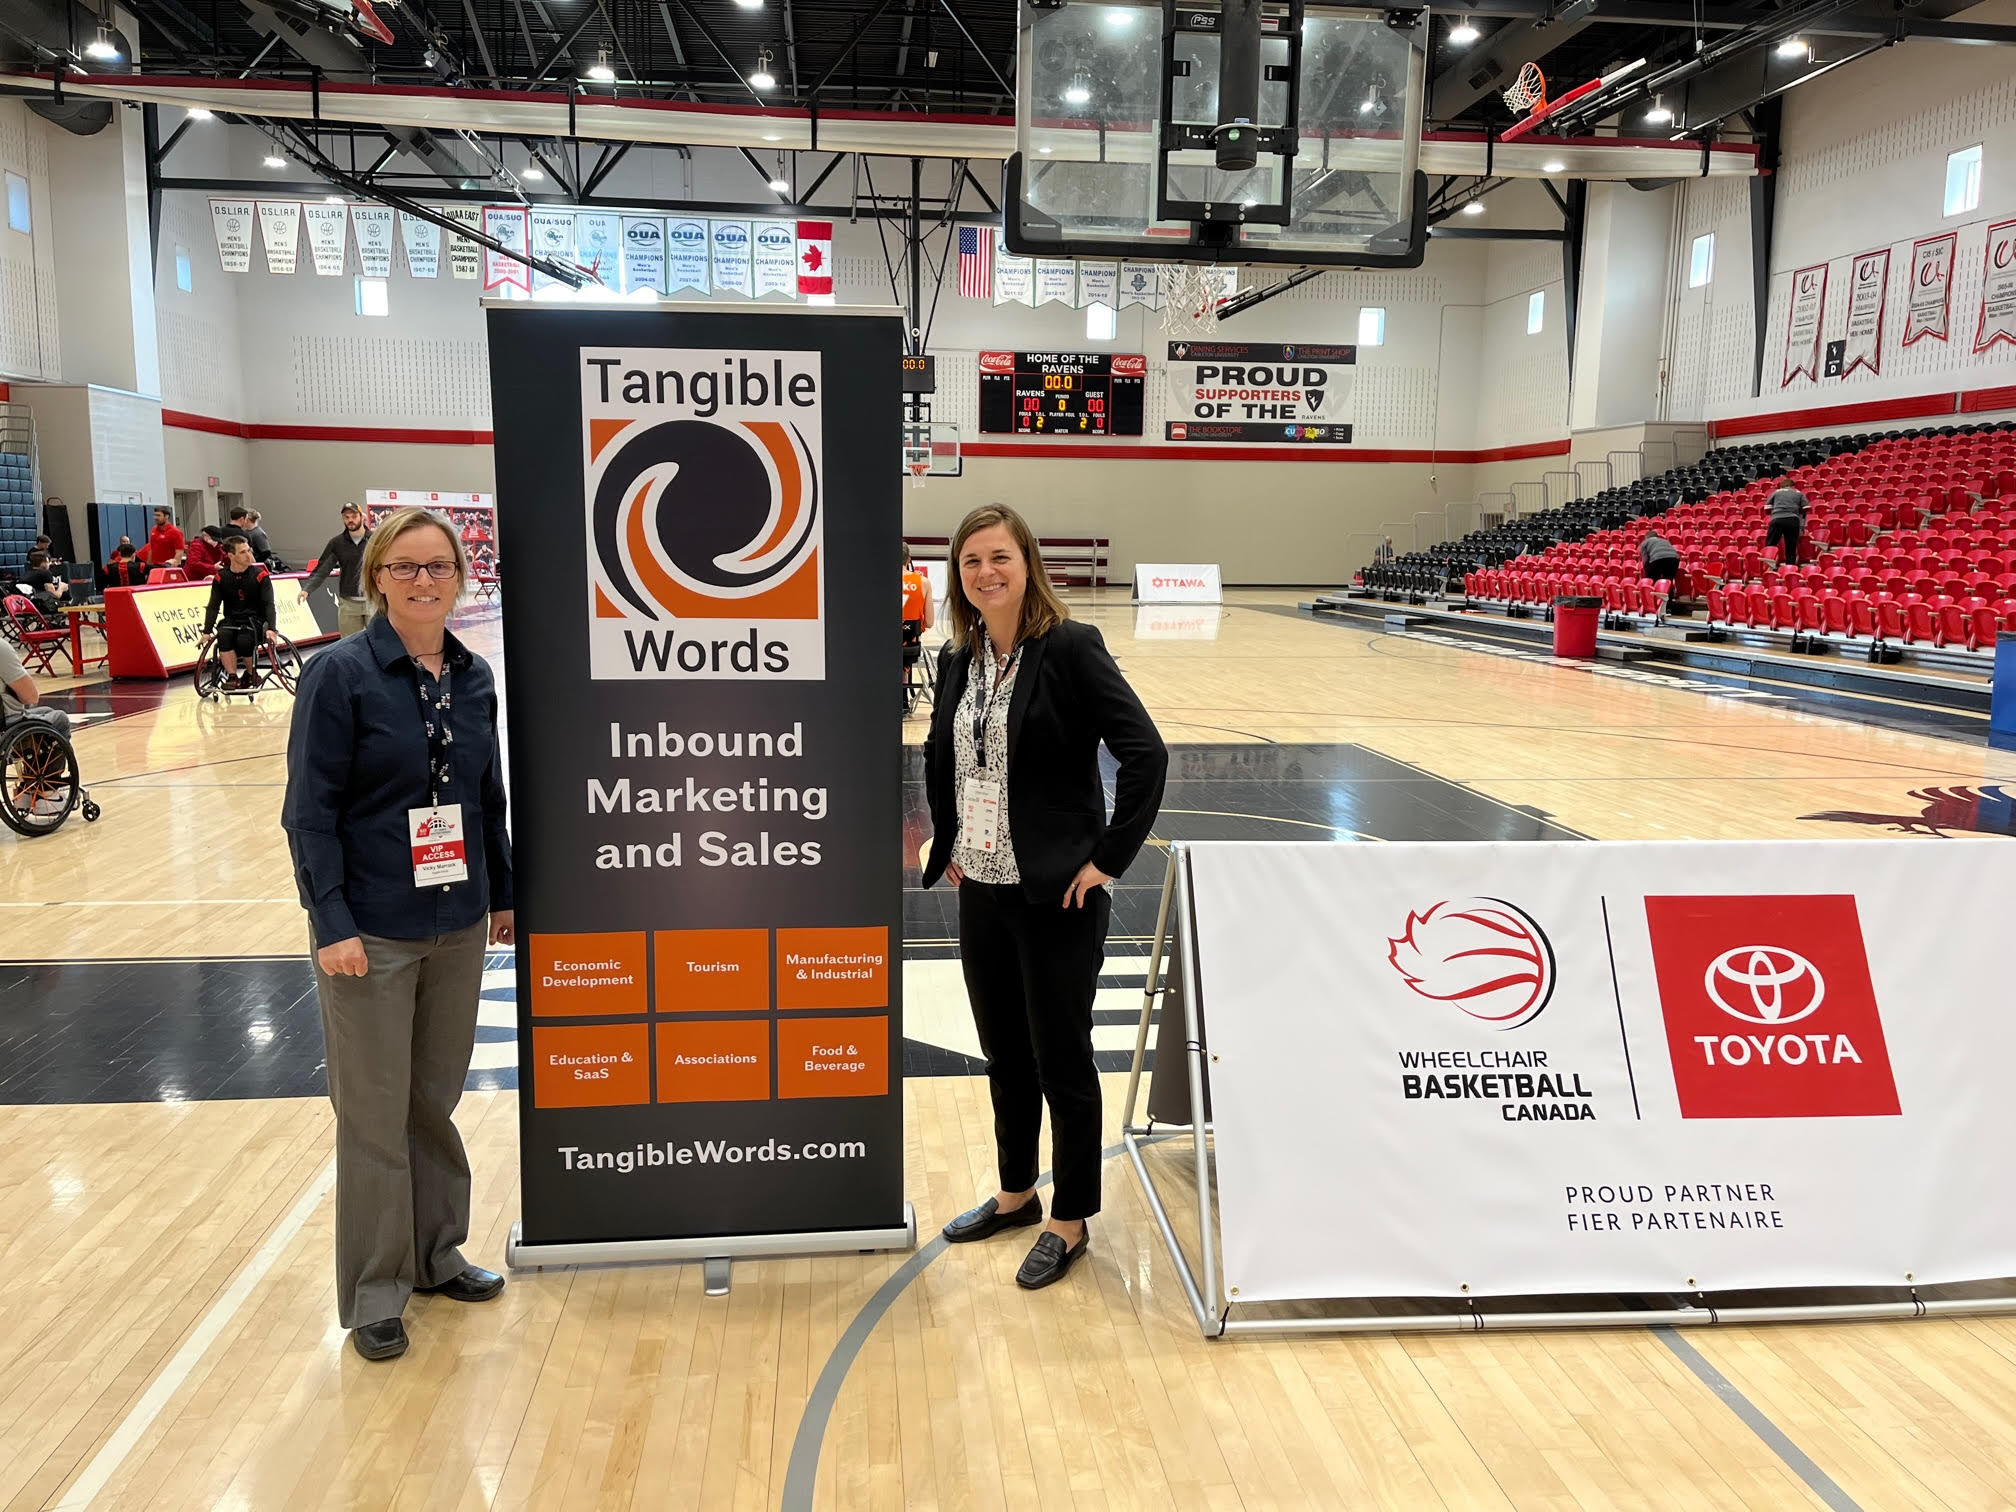 Tangible Words sponsoring Wheelchair Basketball Canada